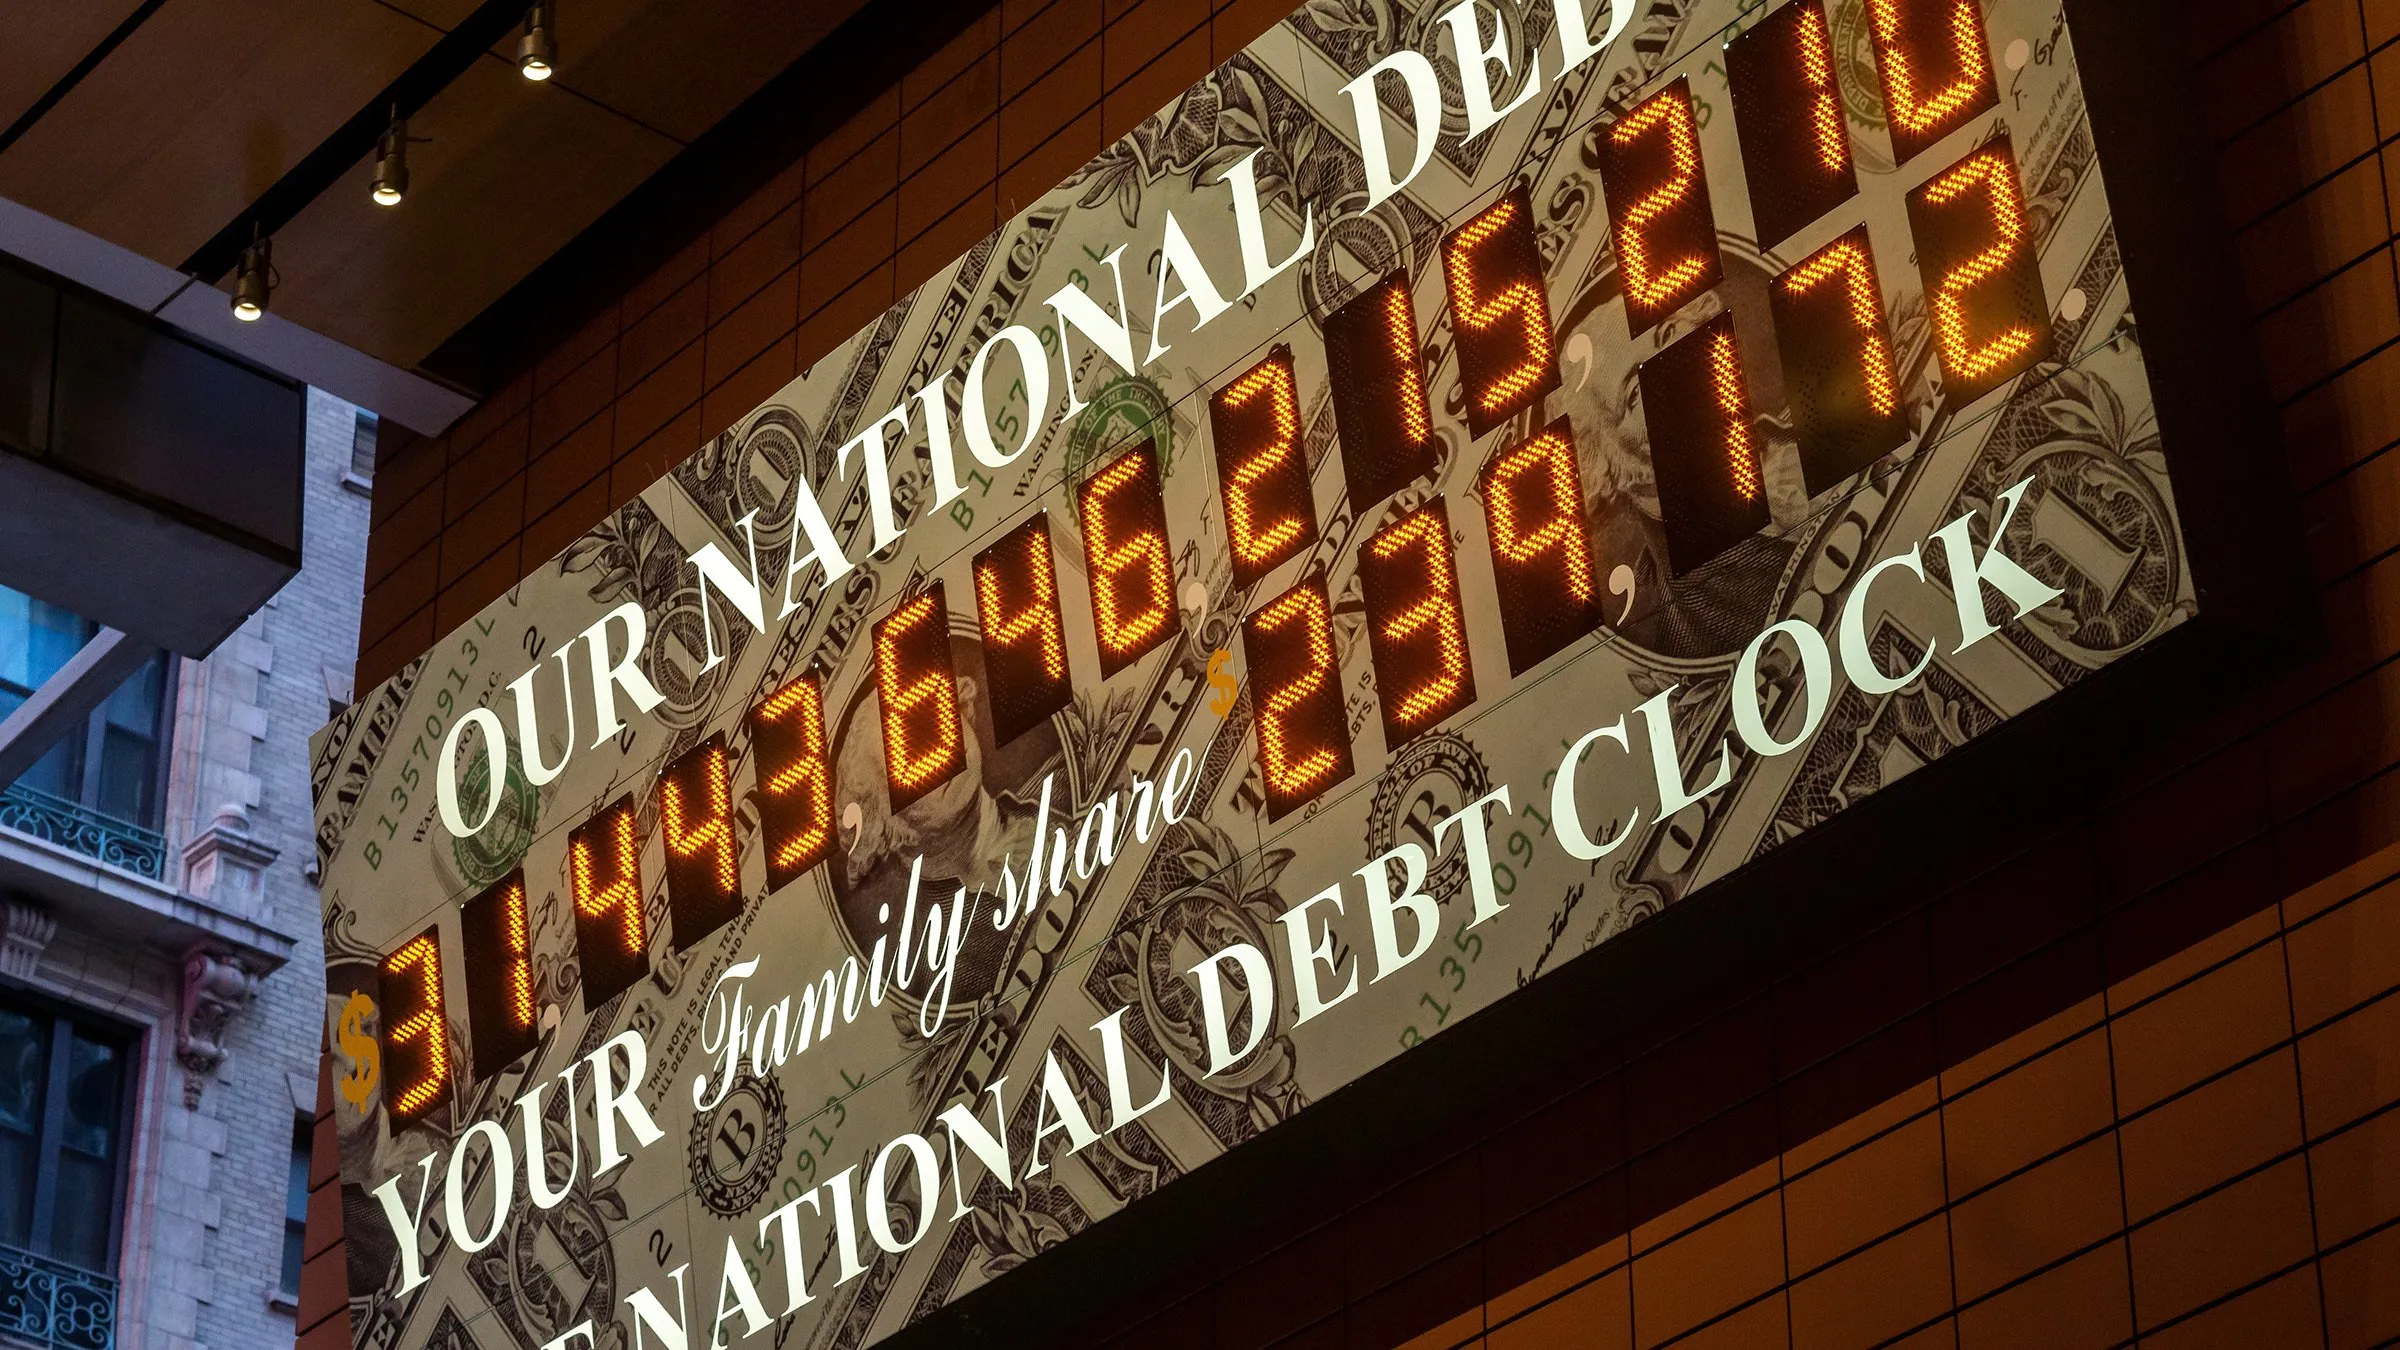 The National Debt Clock in Times Square in New York. Image: rblfmr / Shutterstock.com